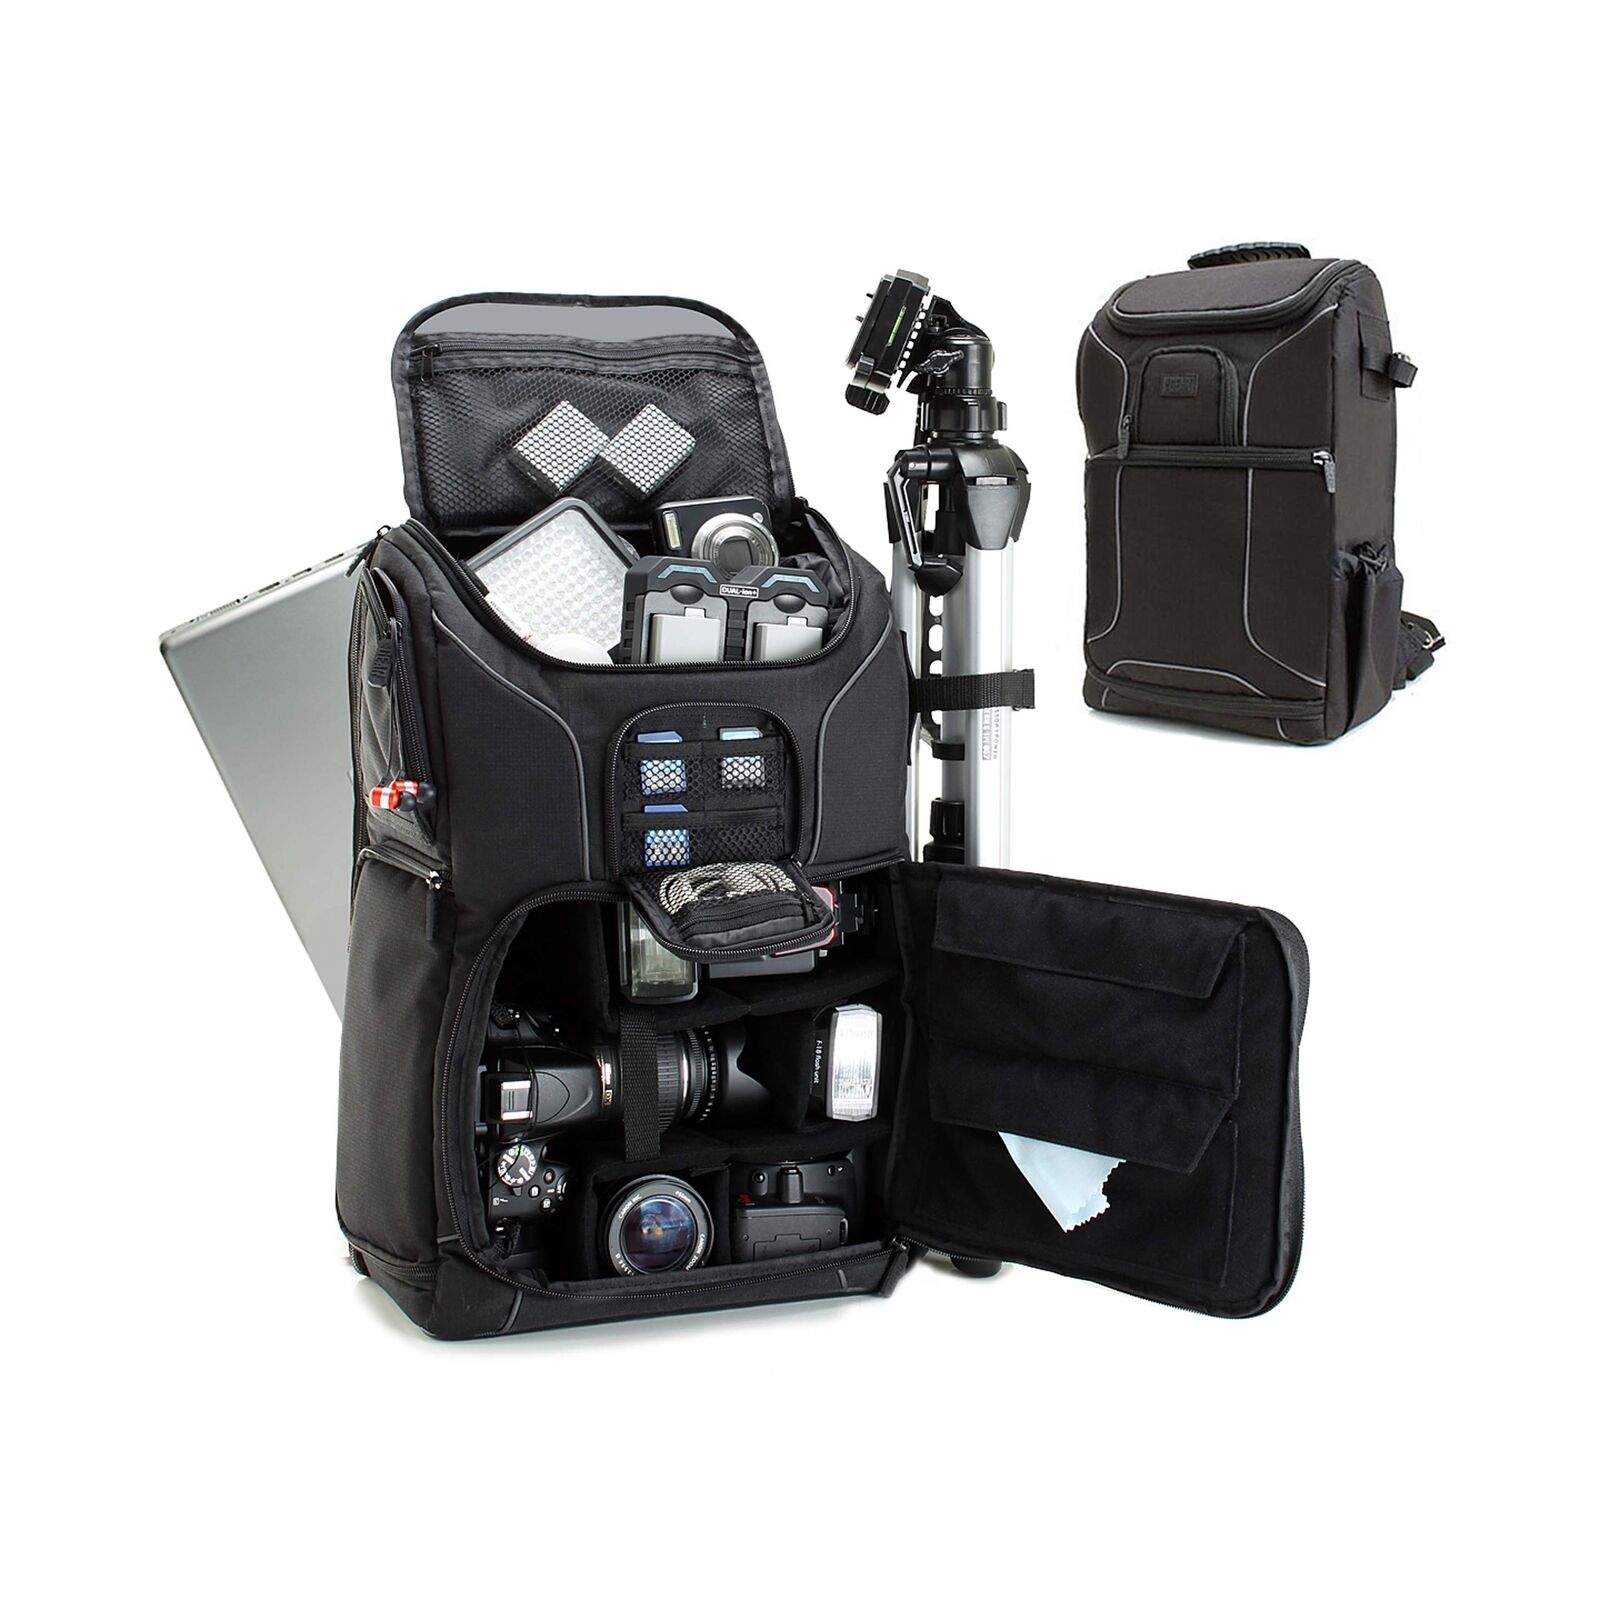 USA Gear Professional Camera Backpack for DSLR & Mirrorless